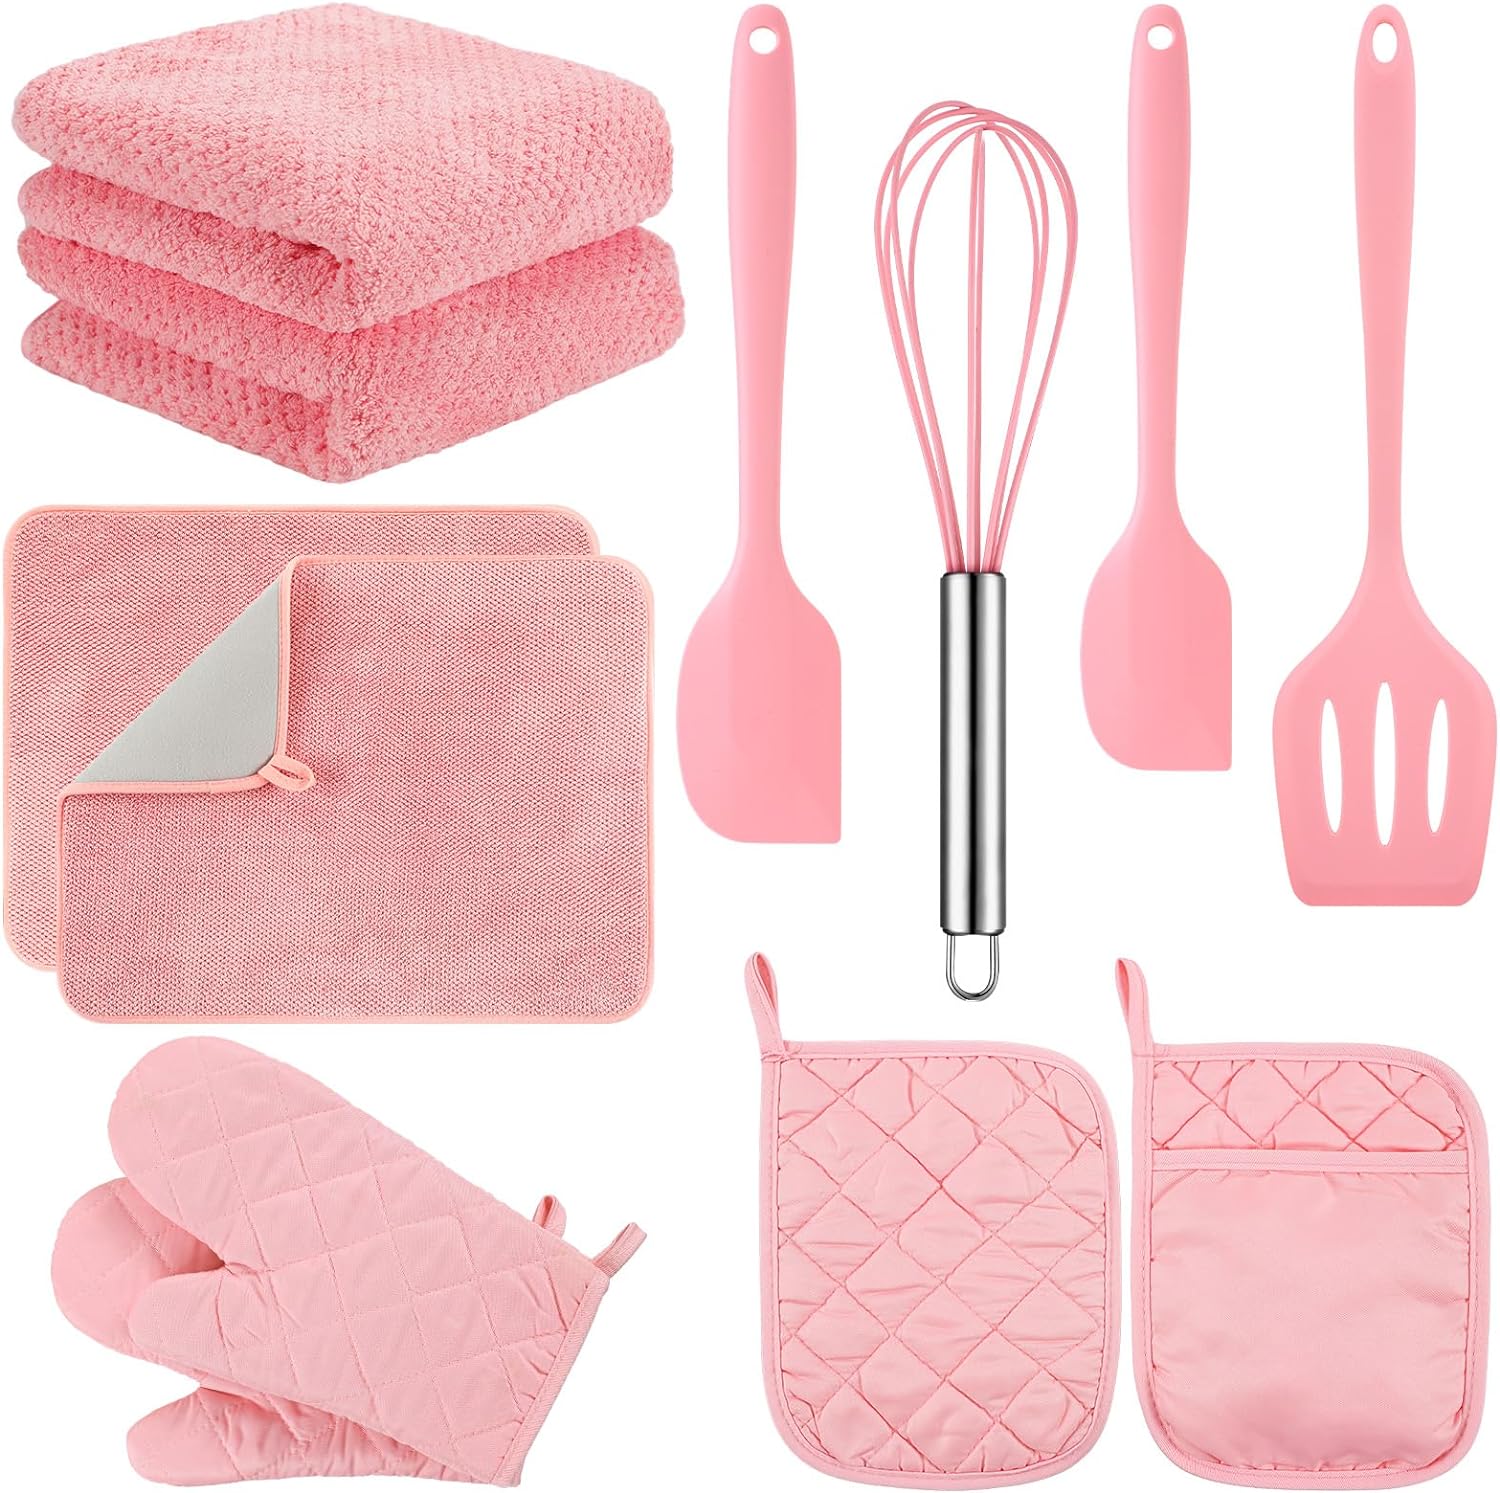 Umigy 12 Pcs Kitchen Accessories Set Including Silicone Cooking Utensils Set, Cotton Oven Mitts and Pot Holders, Kitchen Towels, Dish Drying Mat for Kitchen Baking Cooking Grilling (Pink)